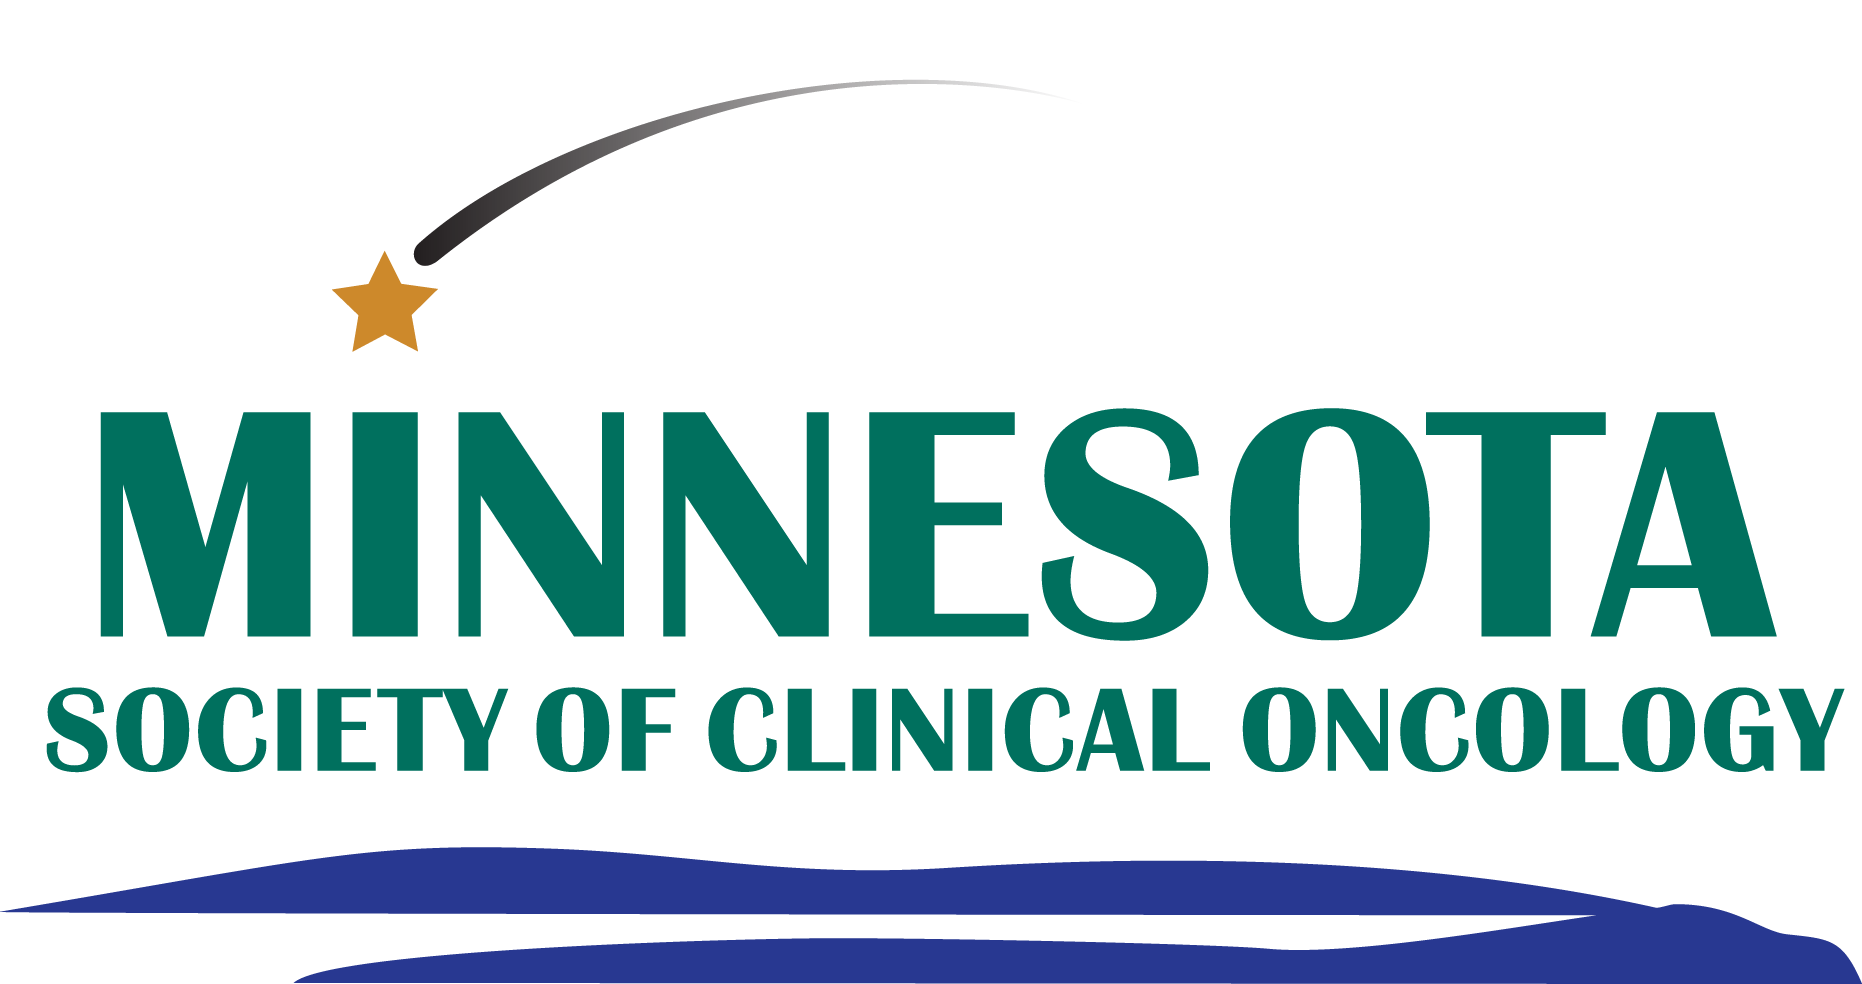 Minnesota Society of Clinical Oncology logo